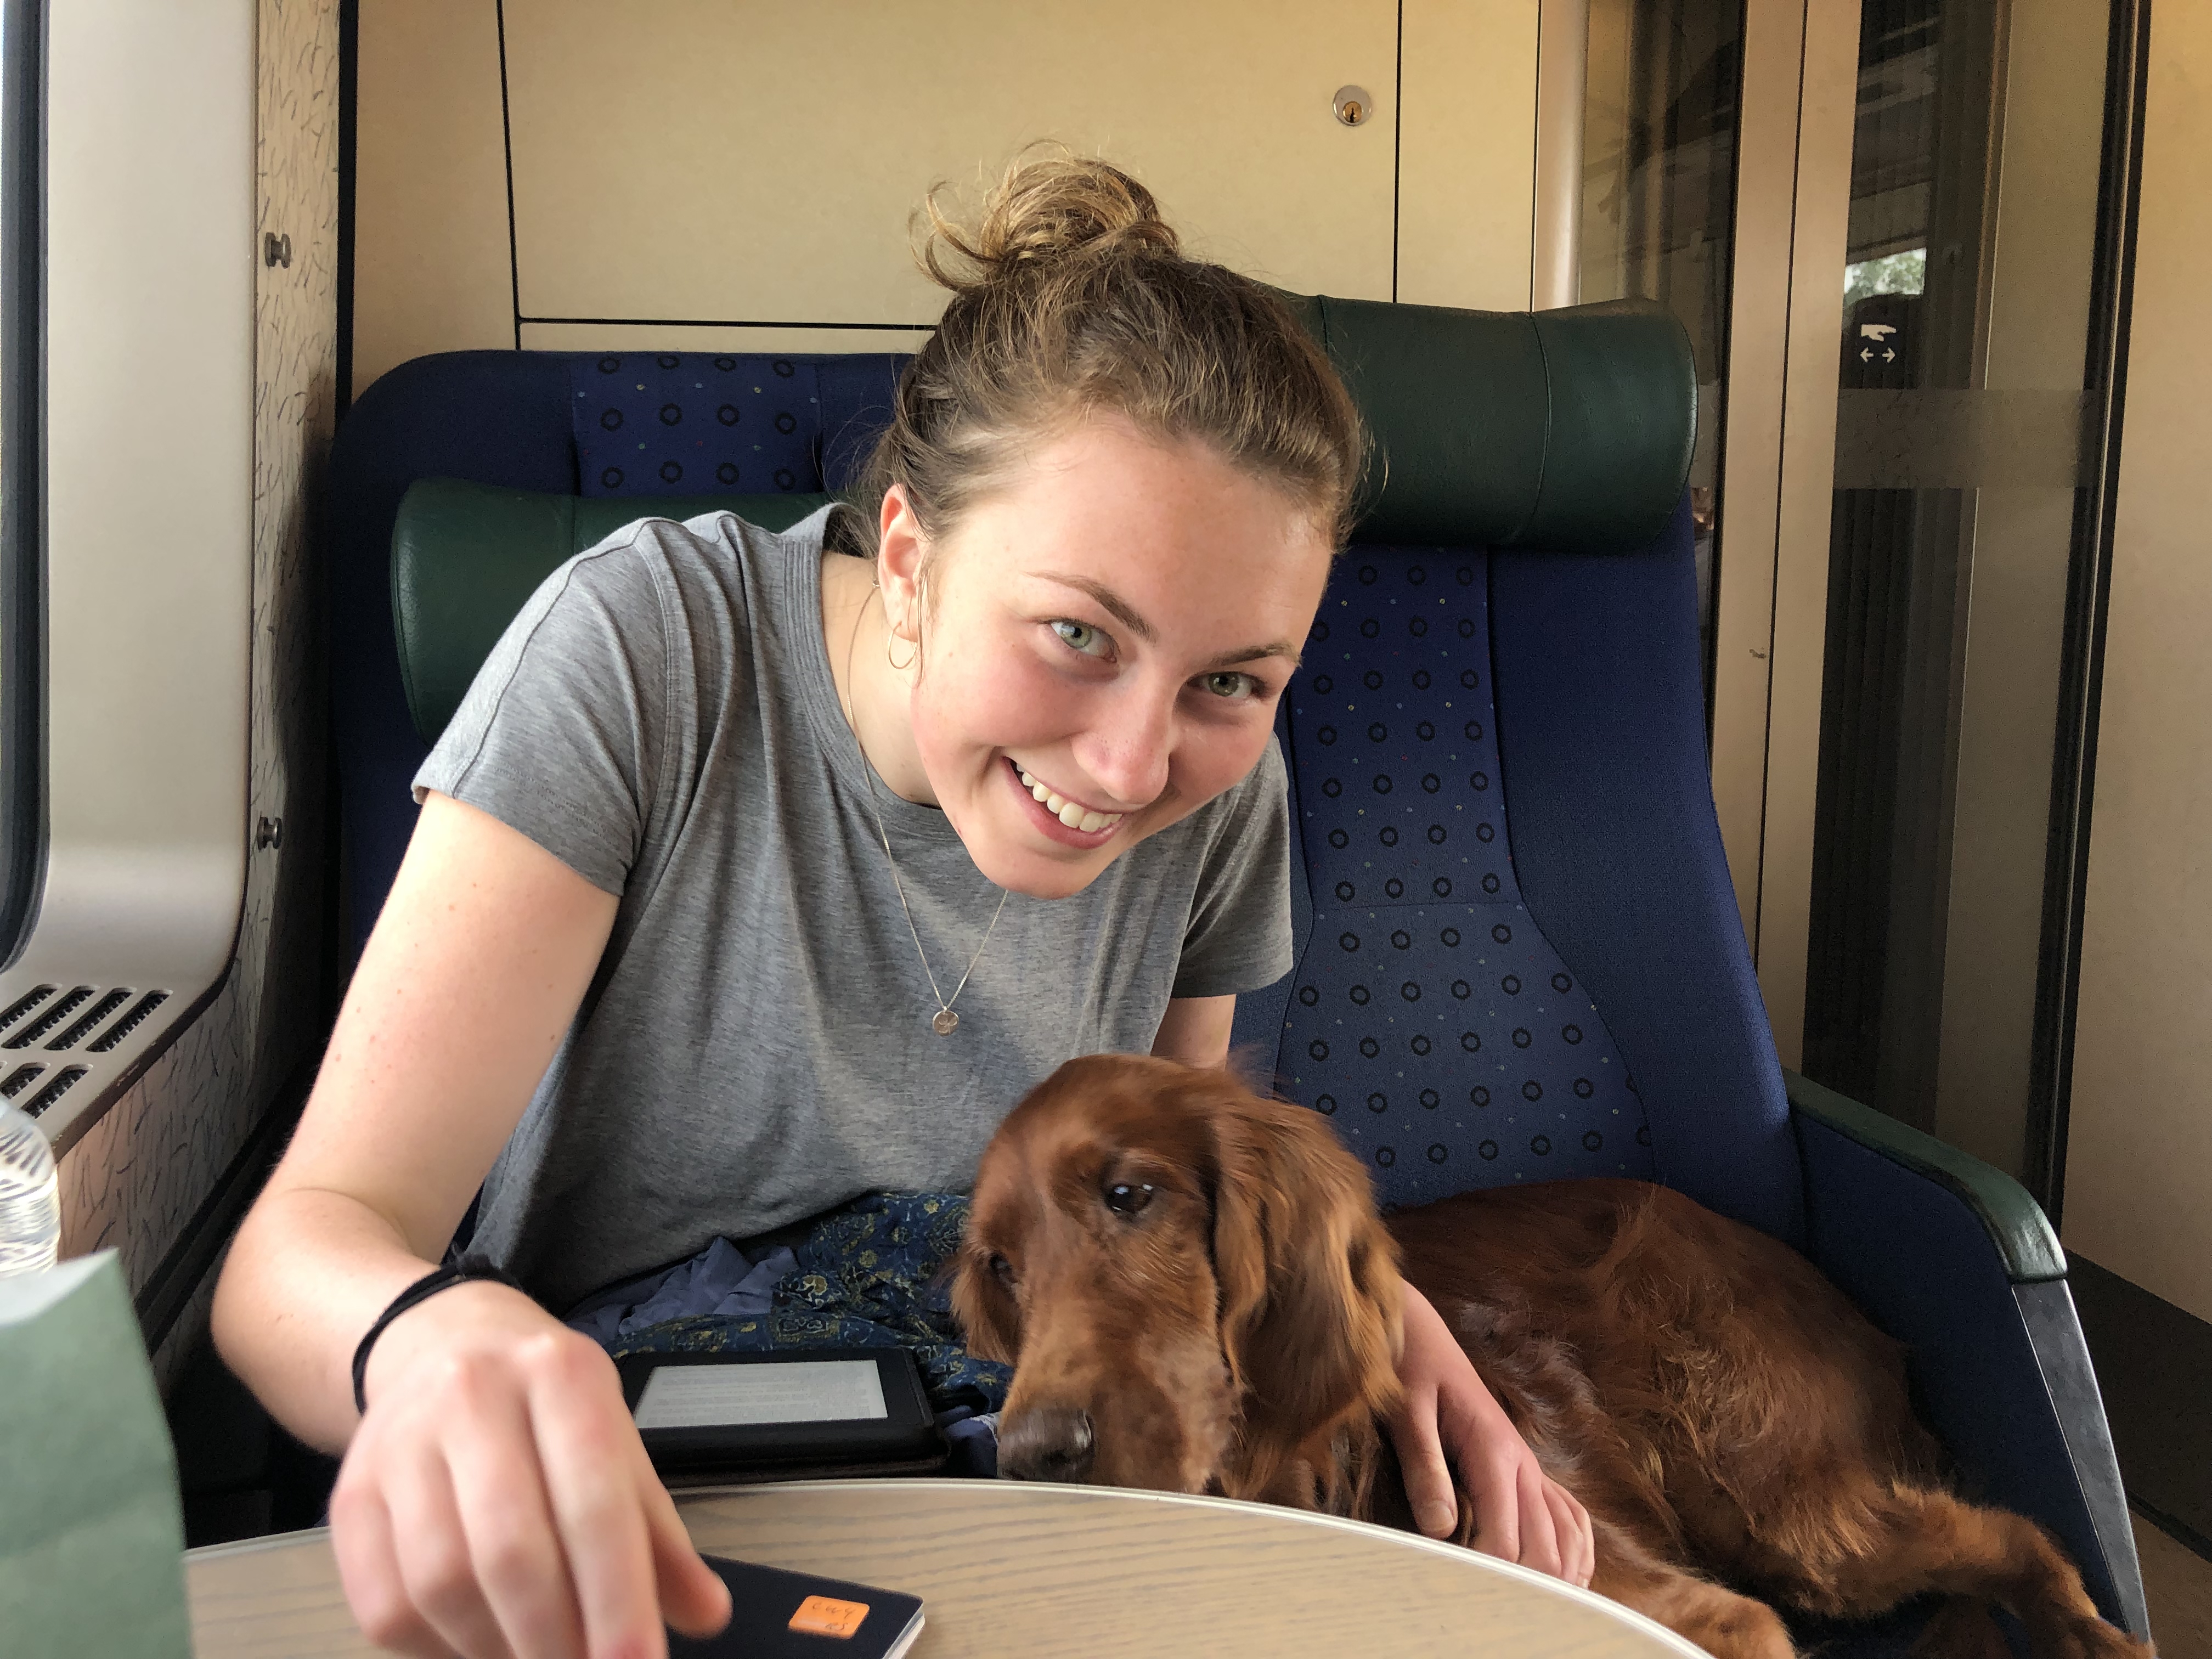 Me and a red-haired dog on a train.